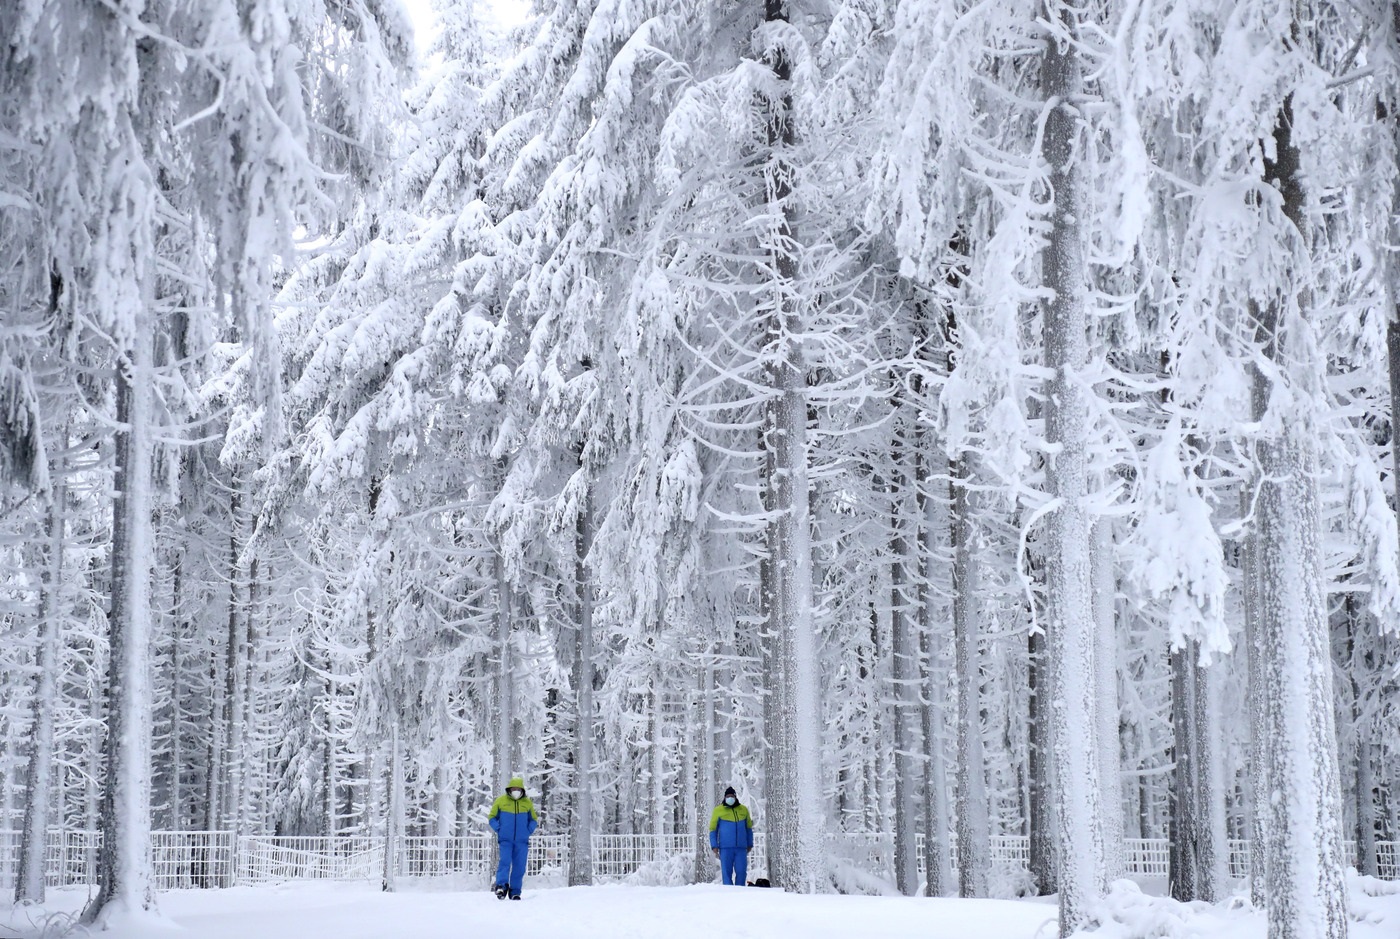 Coaches stand under snow covered trees during the women's 7.5 km sprint race at the Biathlon World Cup in Oberhof, Germany, Friday, Jan. 8, 2021. (AP Photo/Matthias Schrader)